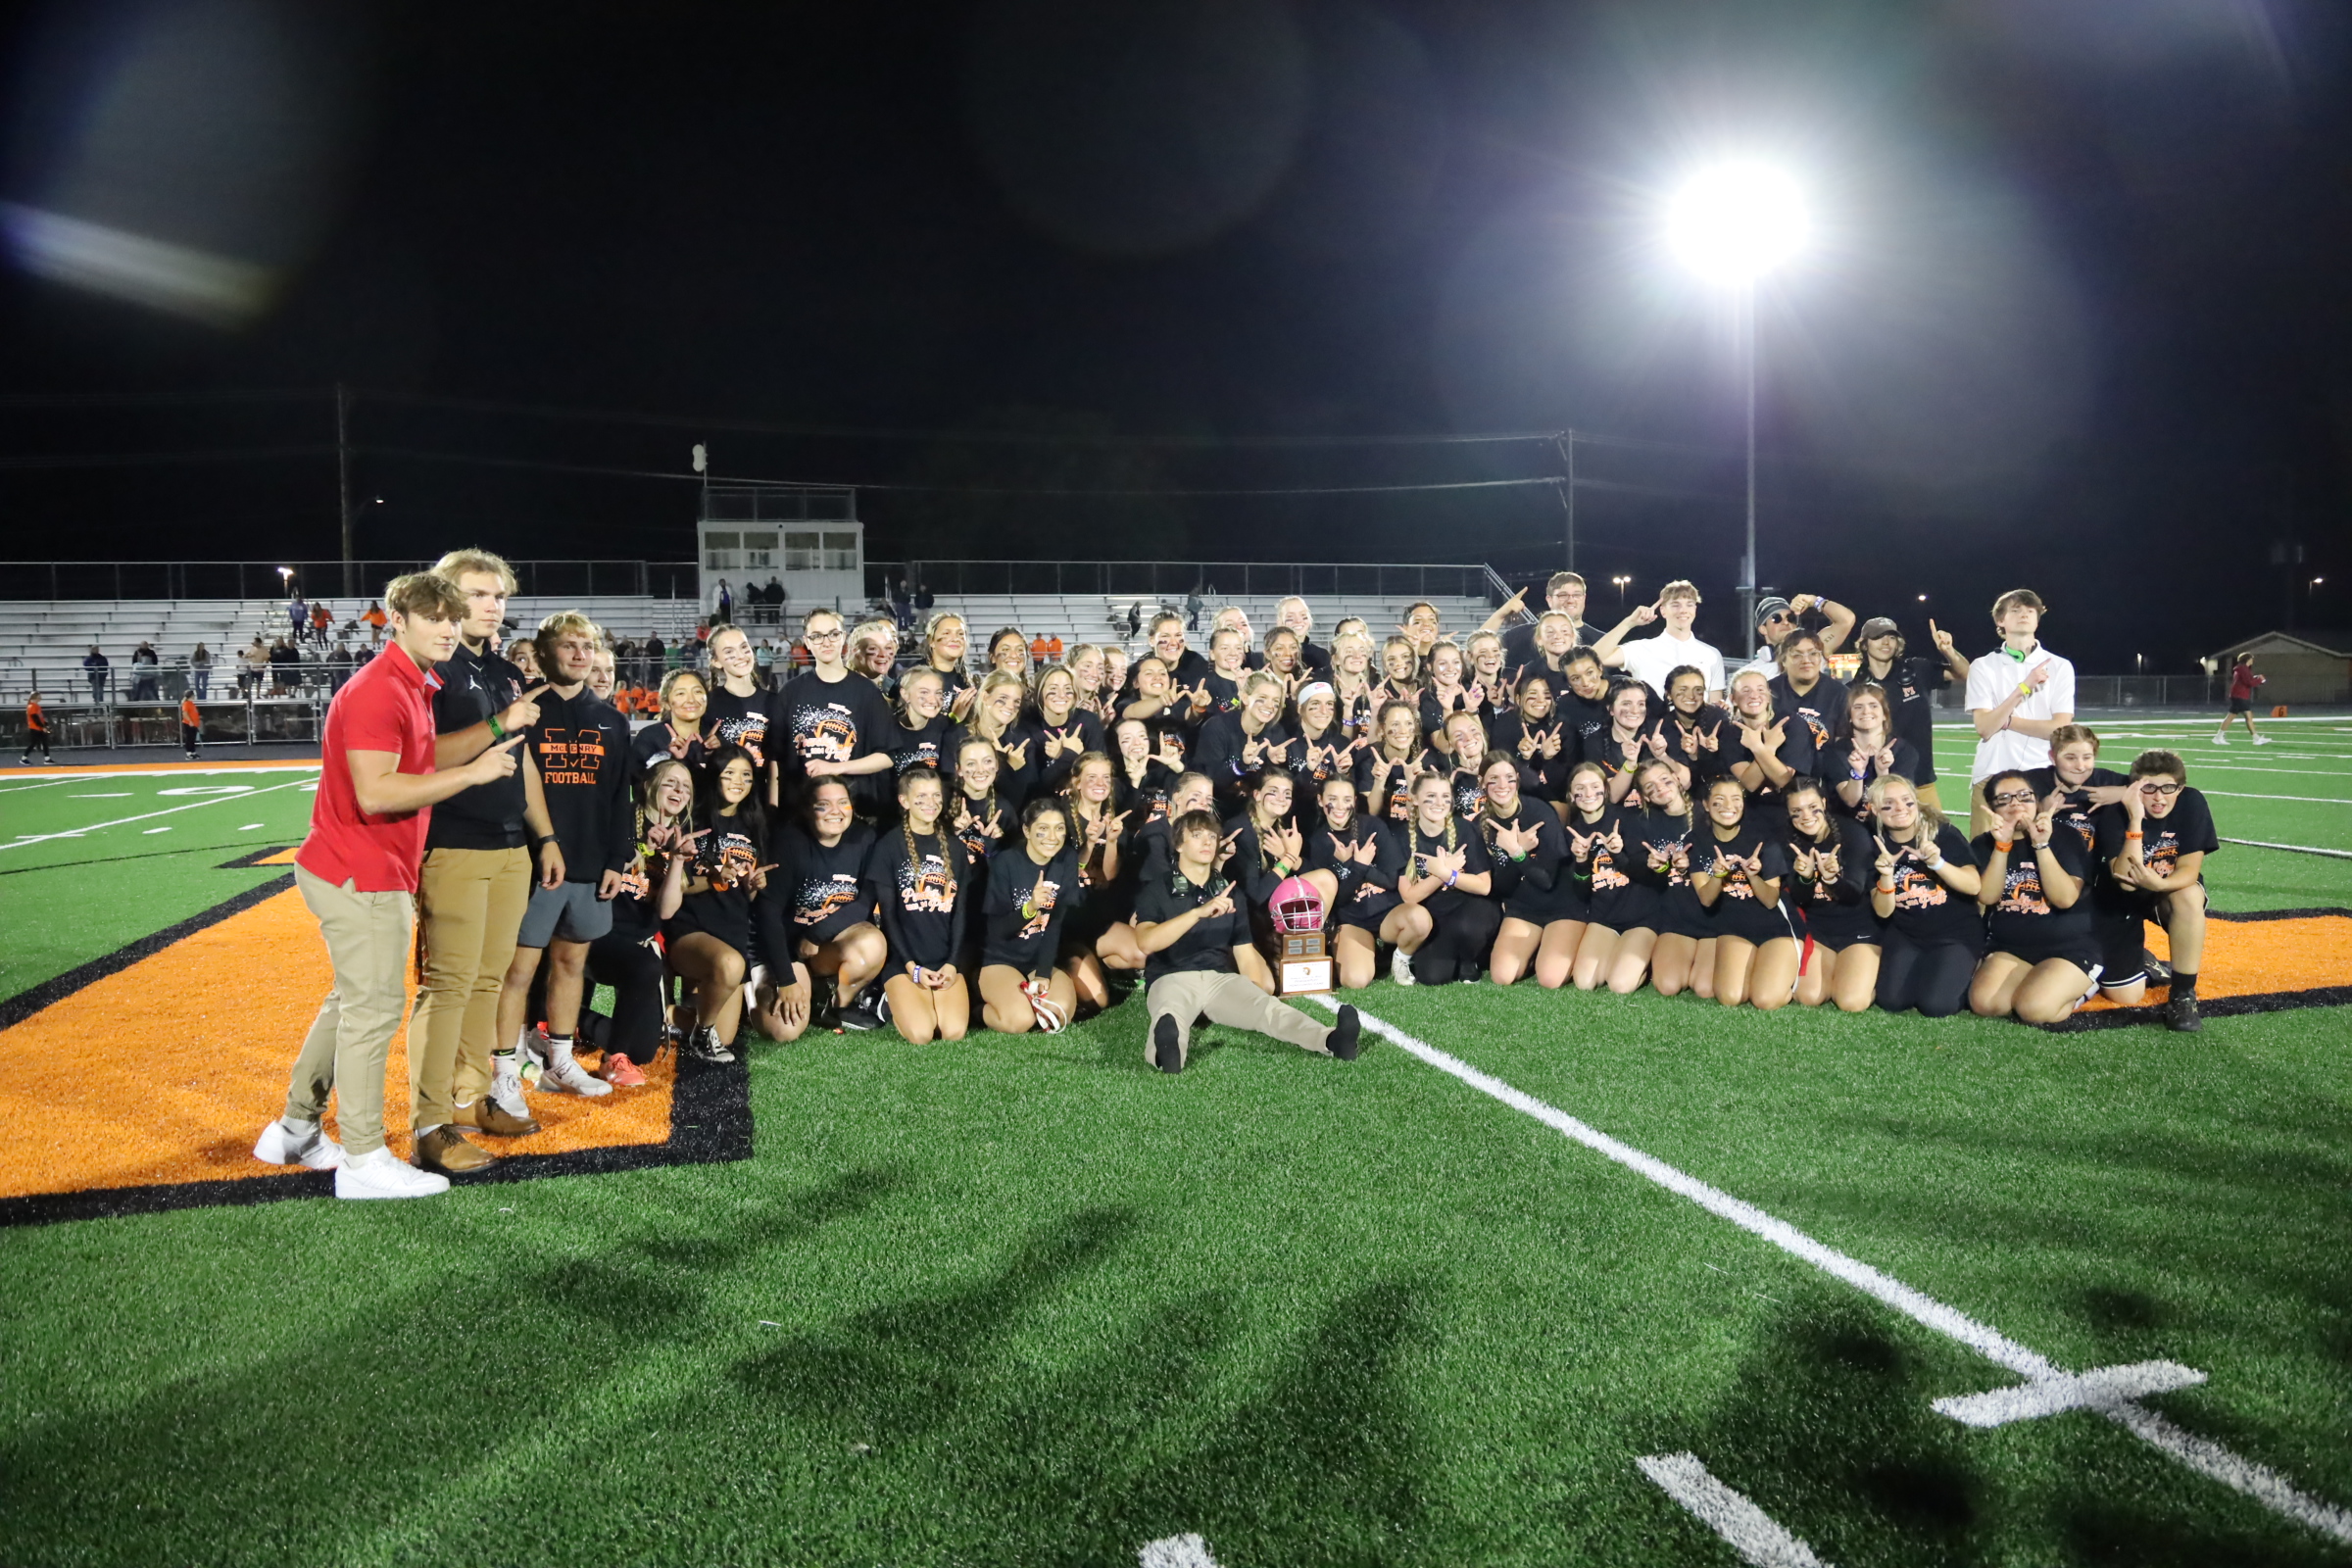 Powder Puff seniors with the trophy